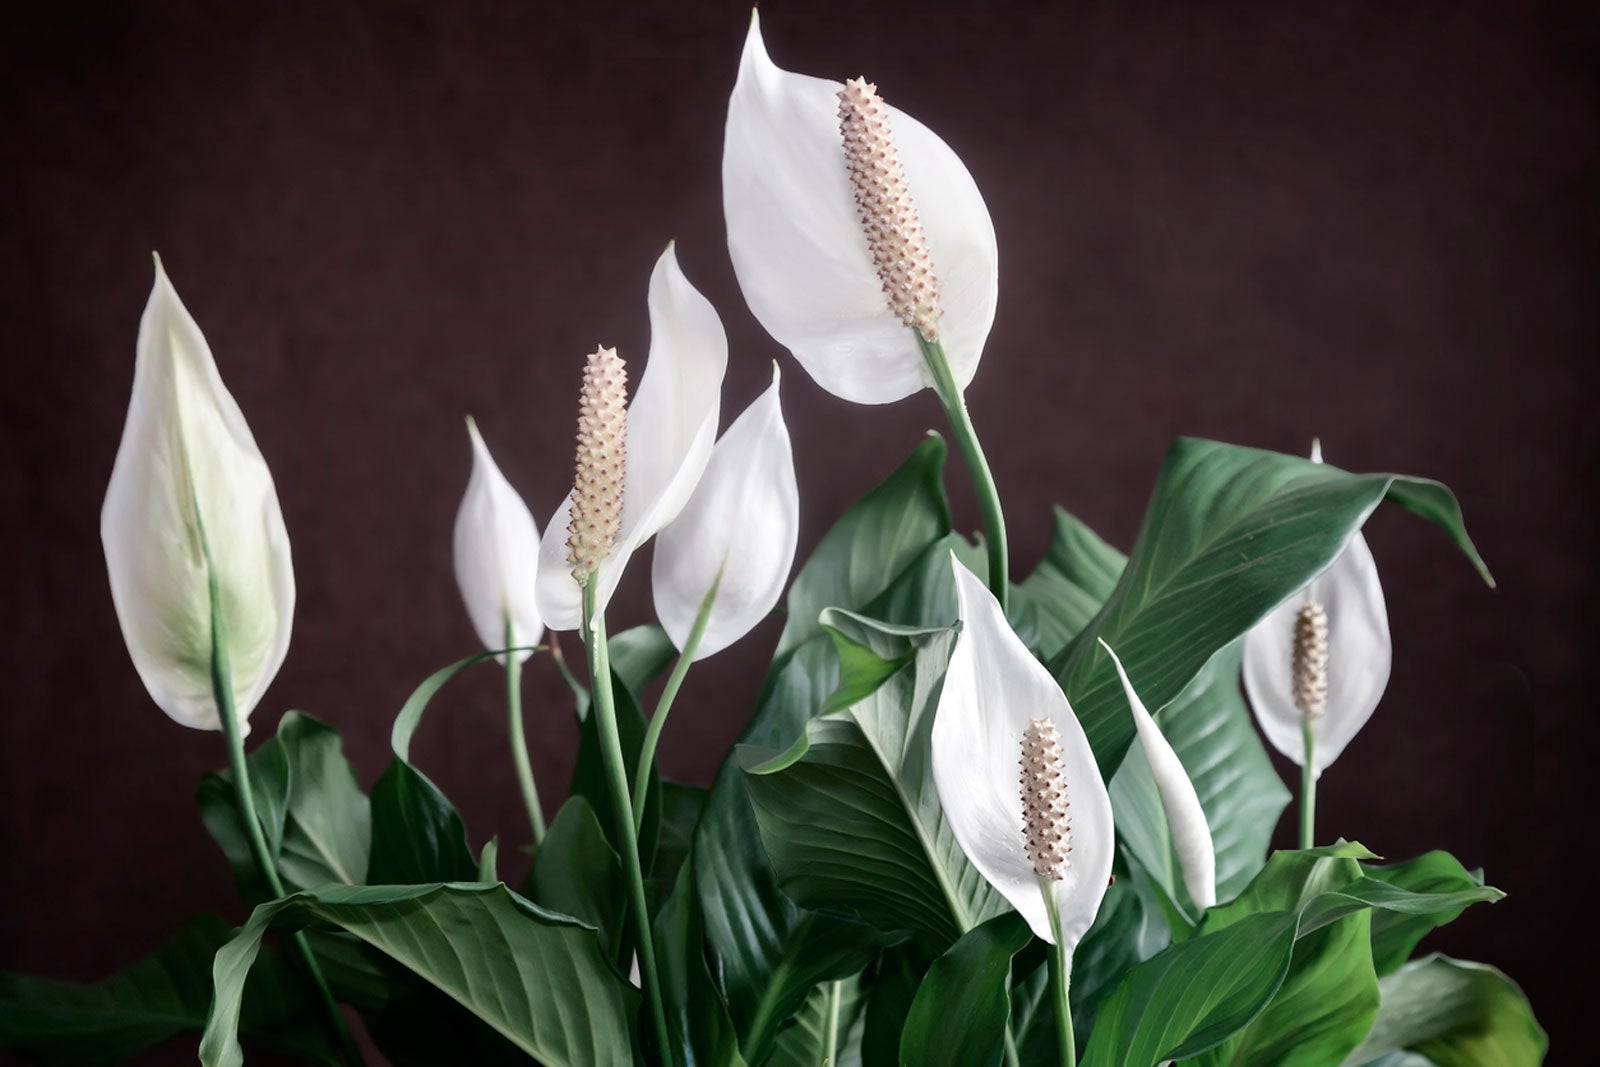 Corresponding to Learner Is Low Light Flowering Houseplants – Houseplants That Bloom With Little Light